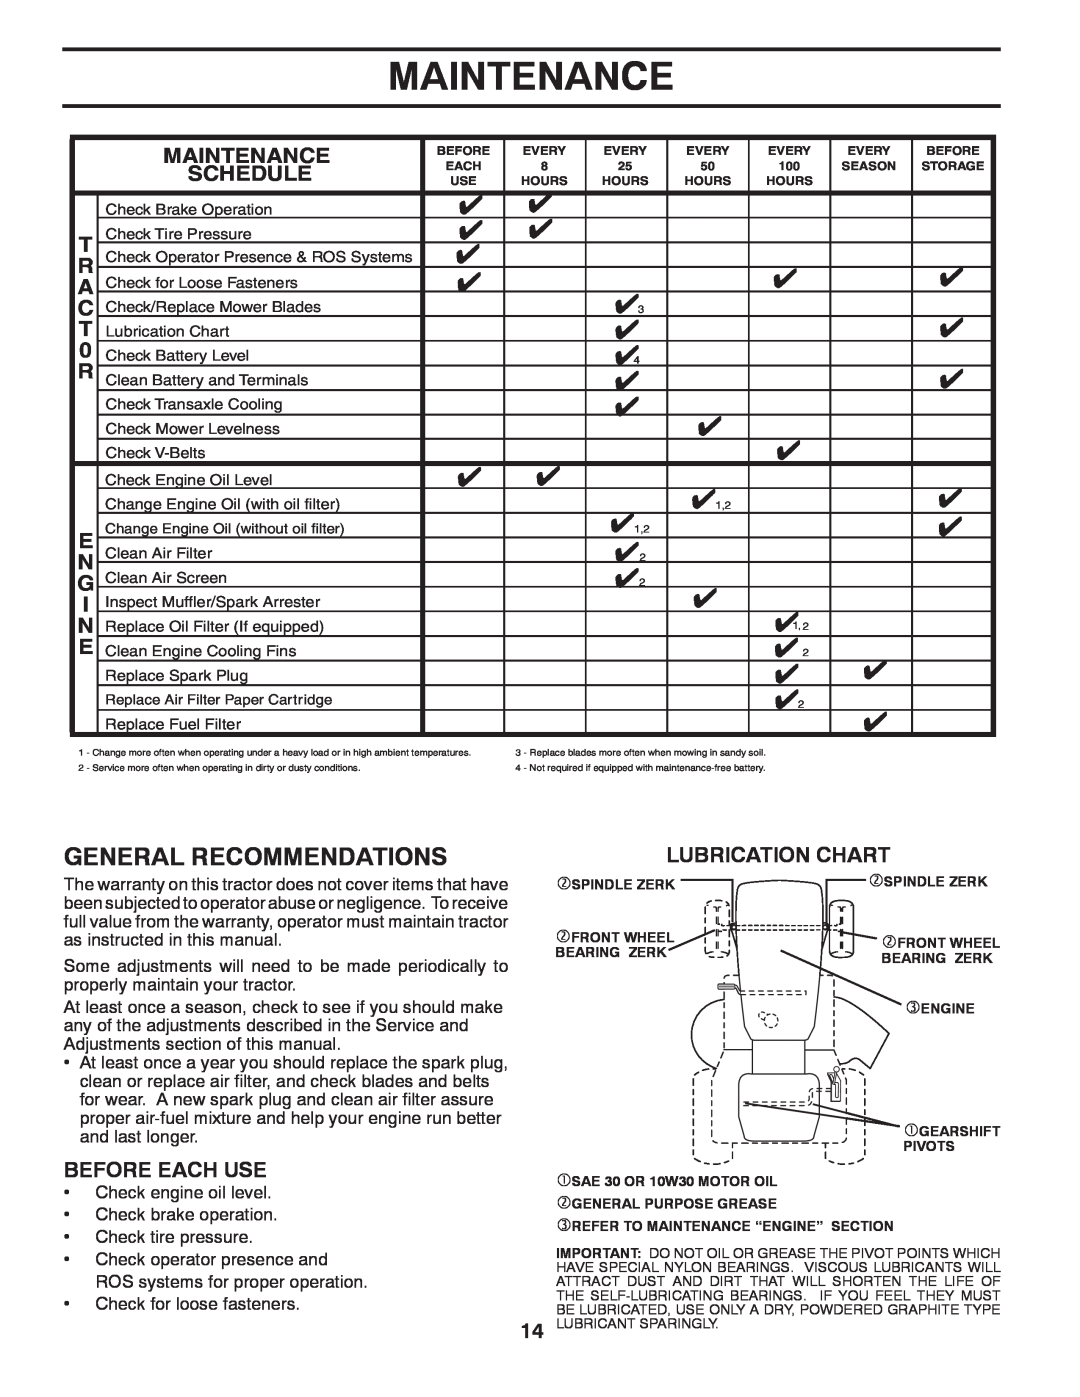 McCulloch MC13538LT, 96012010300 manual Maintenance, General Recommendations, Schedule, Before Each Use, Lubrication Chart 